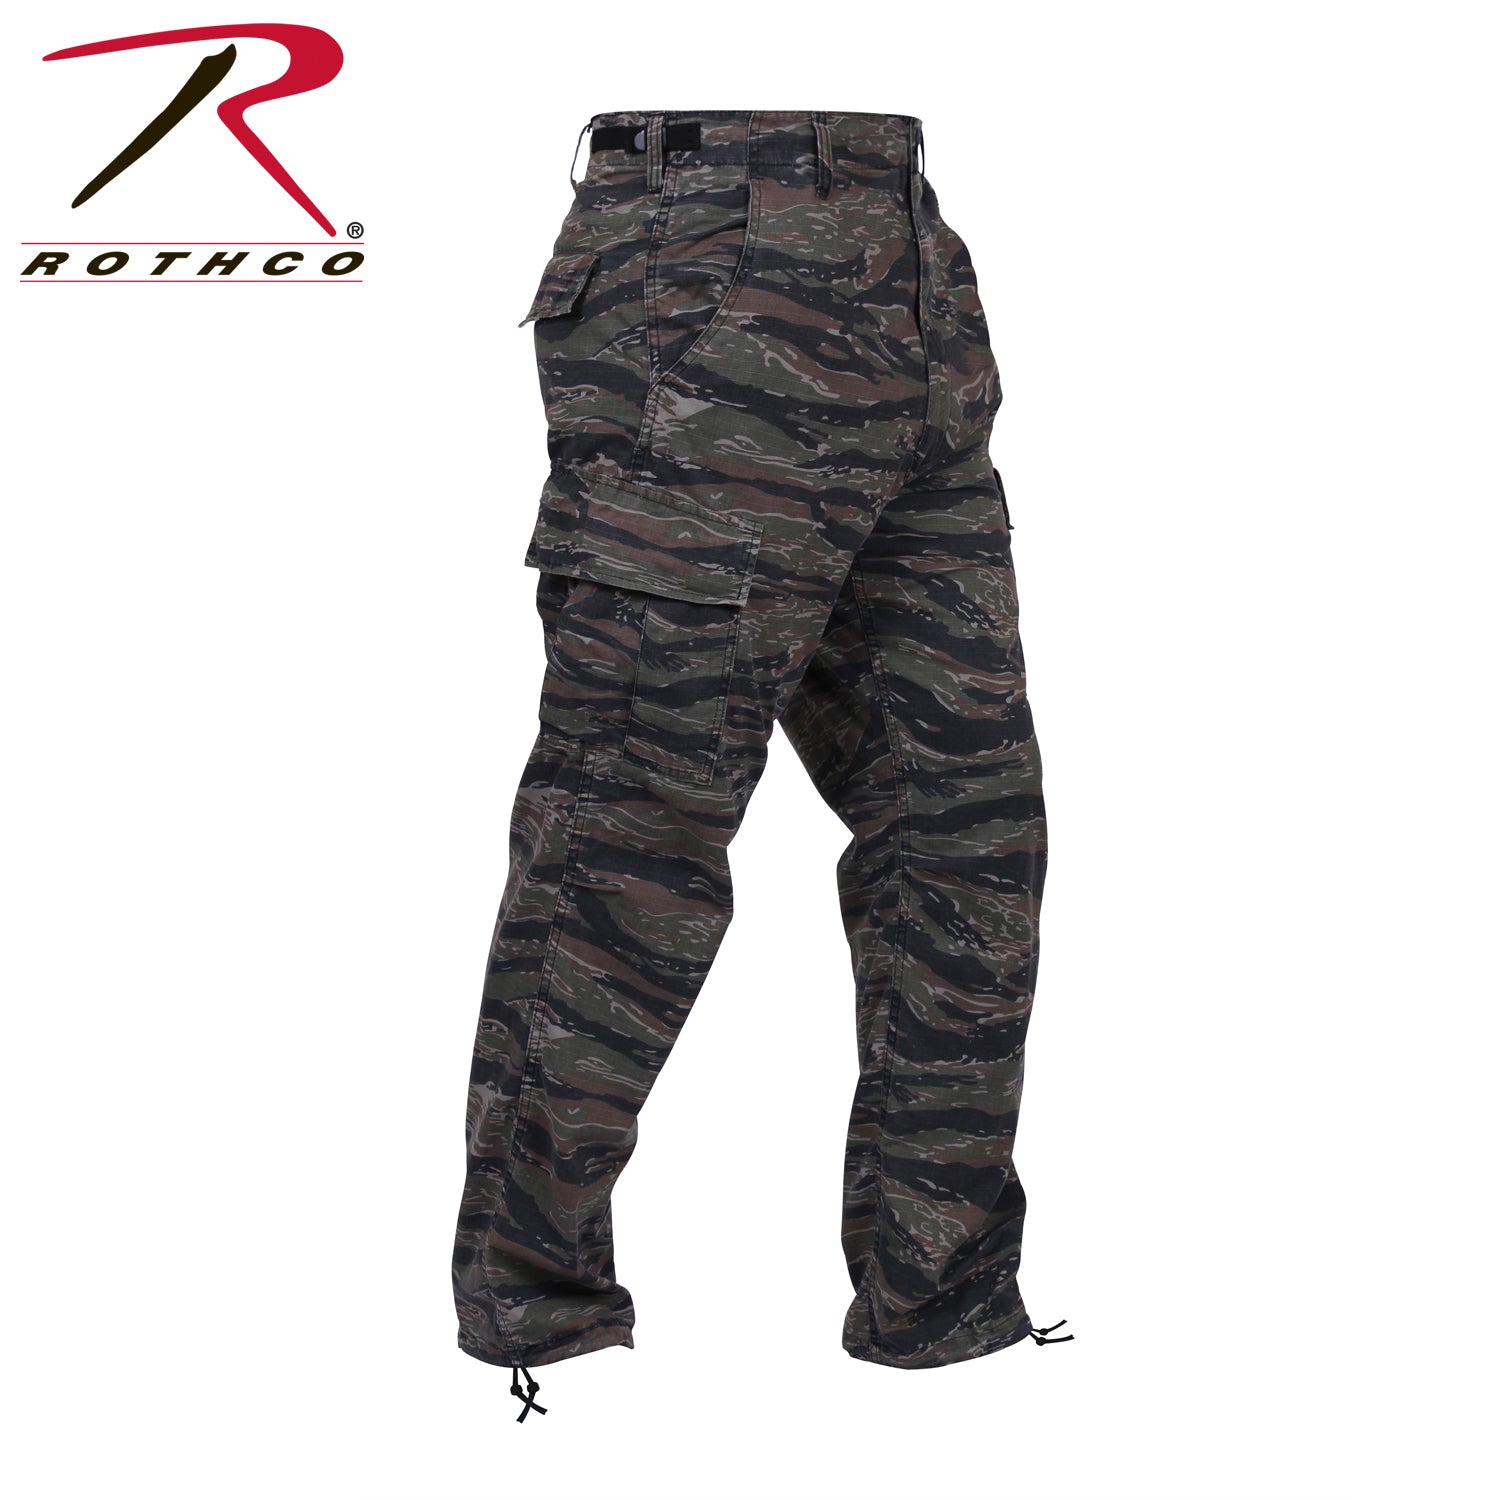 Rothco Camo Tactical BDU Pants - Eminent Paintball And Airsoft